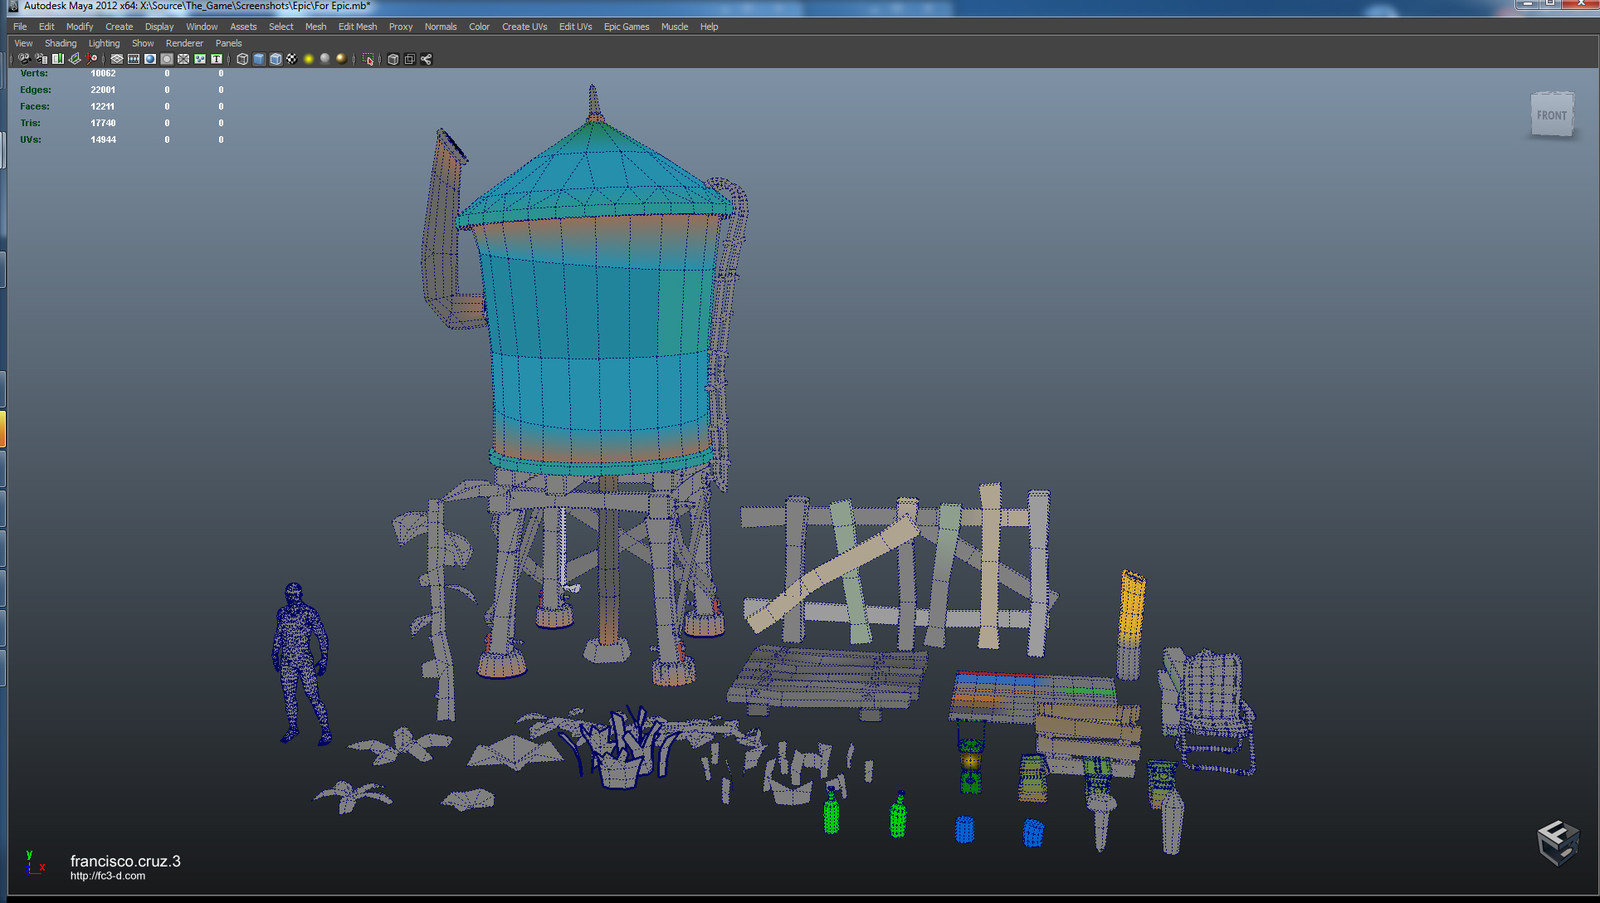 All assets as seen in Maya. Vertex coloring part of static mesh. Can be overridden in UE4 for more color variations.